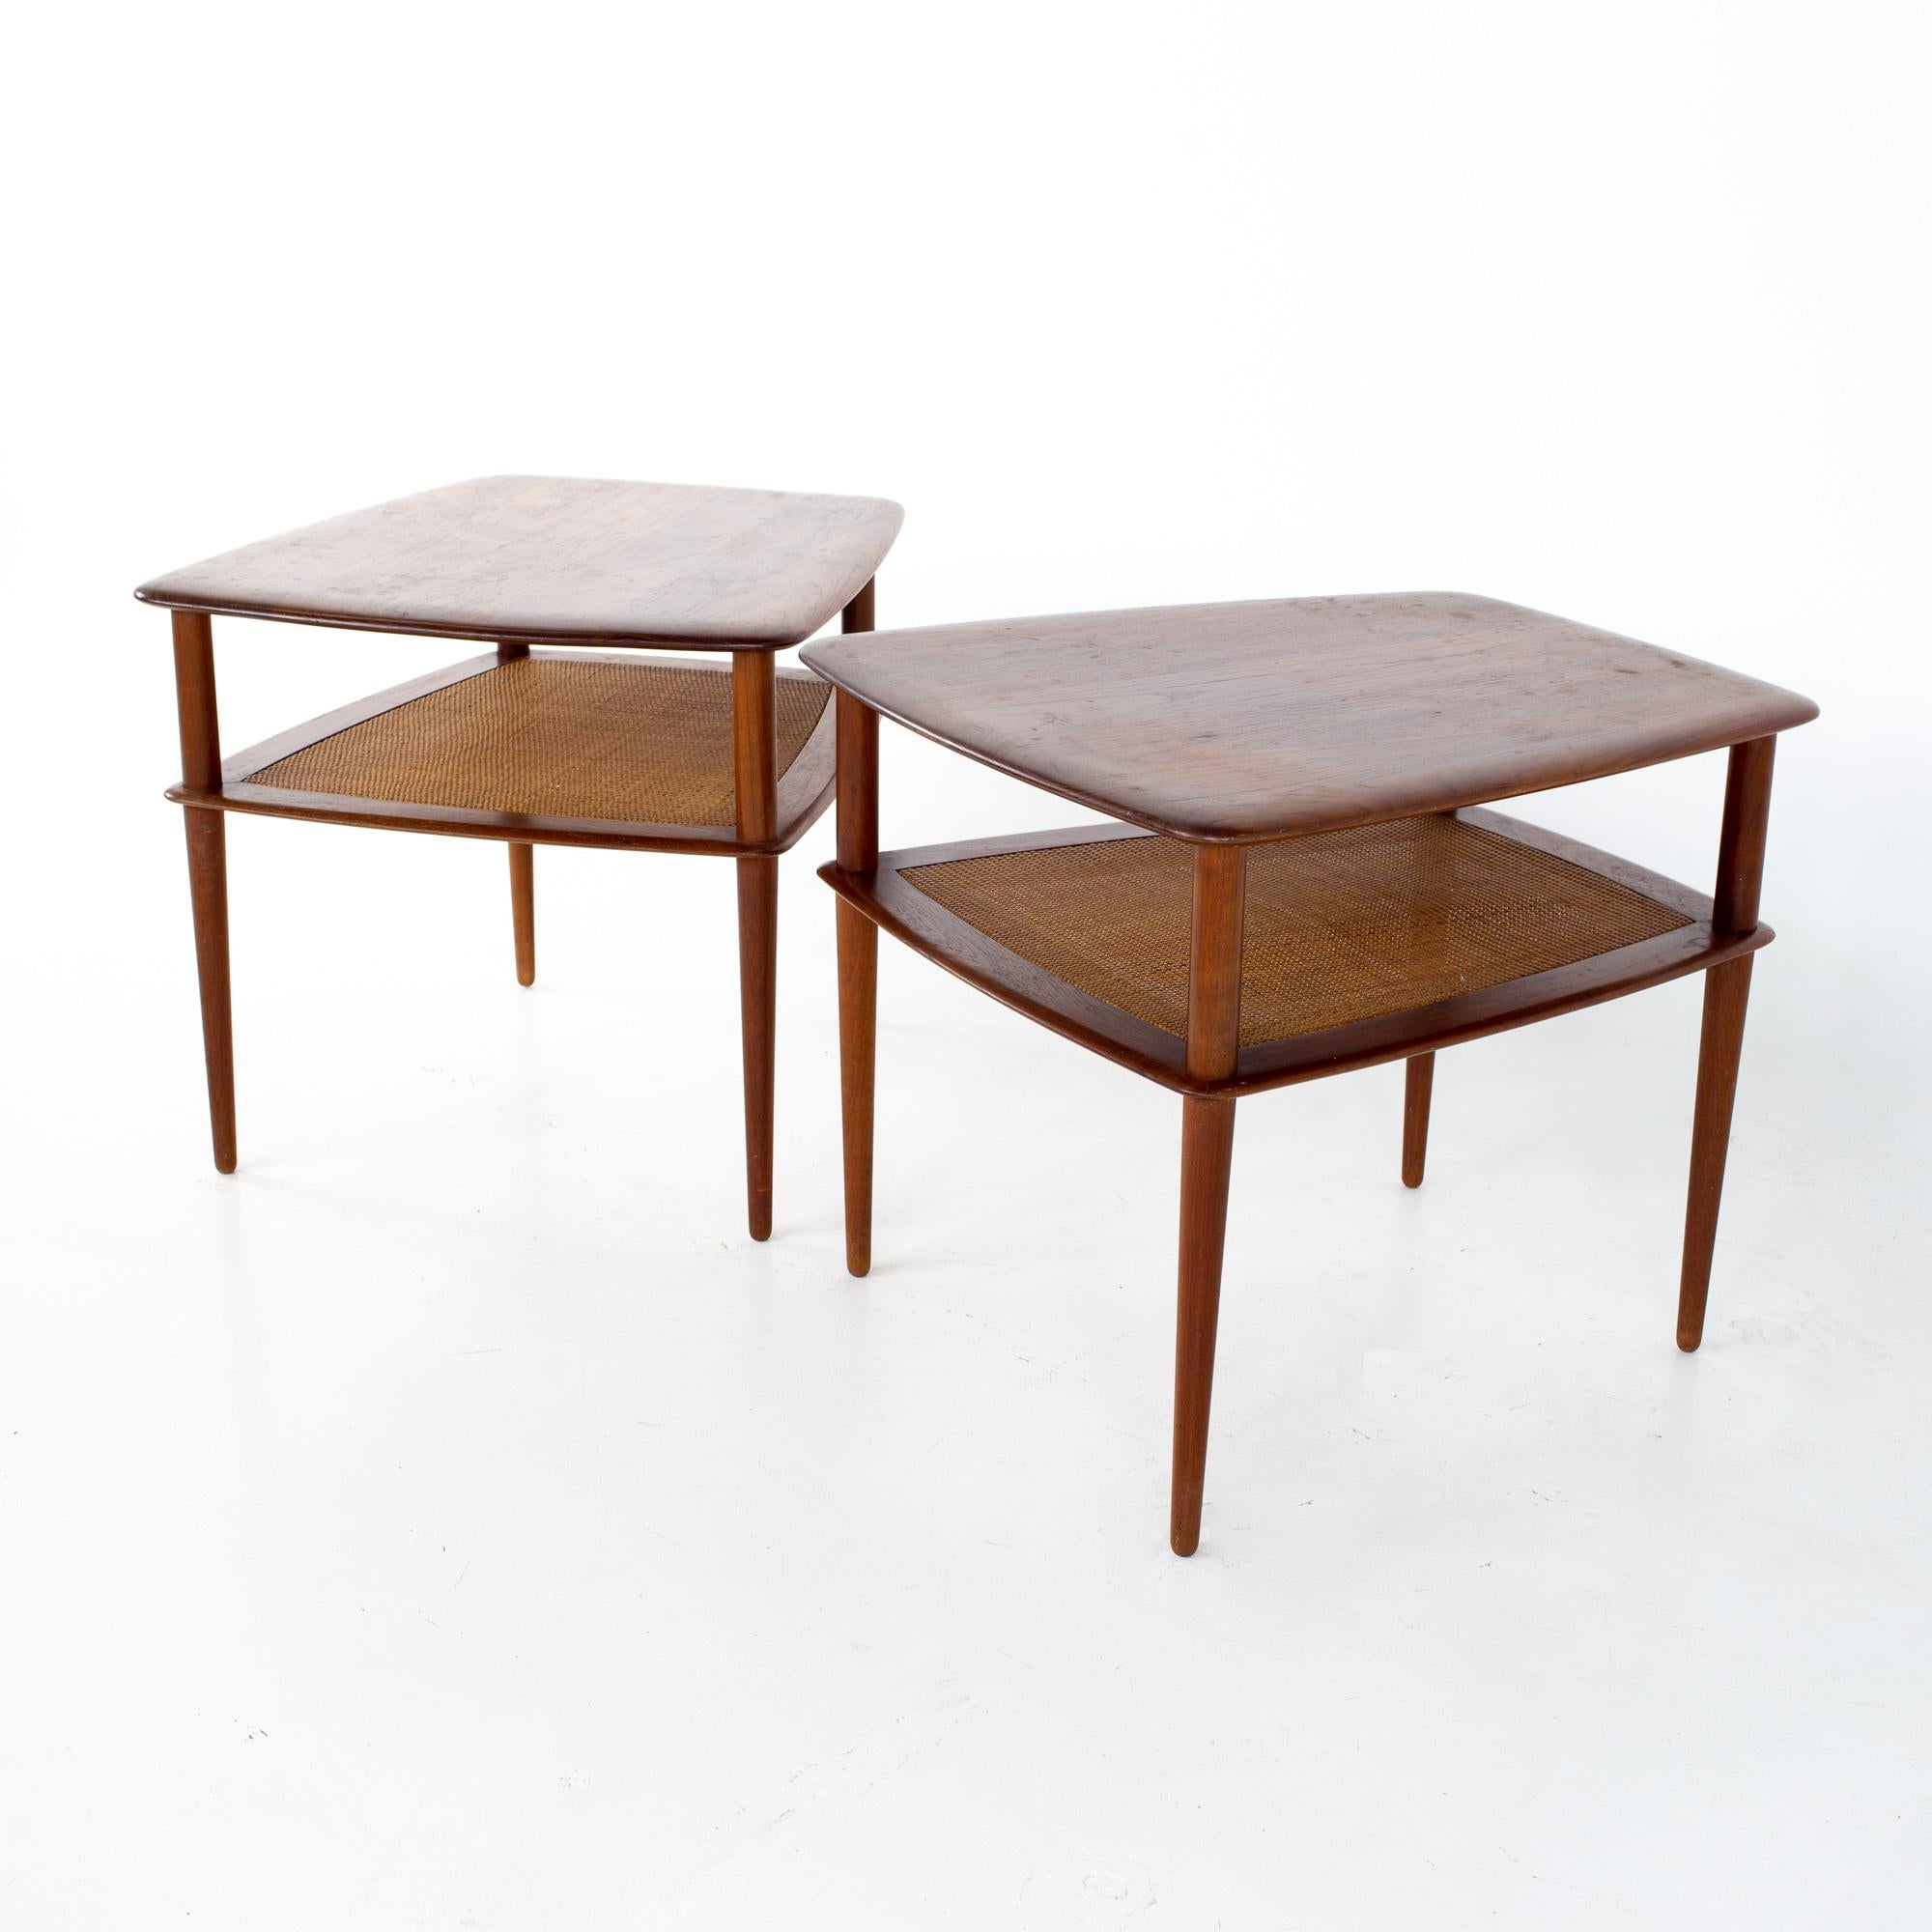 Peter Hvidt for France and Sons mid century teak and cane side end tables - a pair
End table measures: 25 wide x 27.5 deep x 22.75 inches high 

All pieces of furniture can be had in what we call restored vintage condition. That means the piece